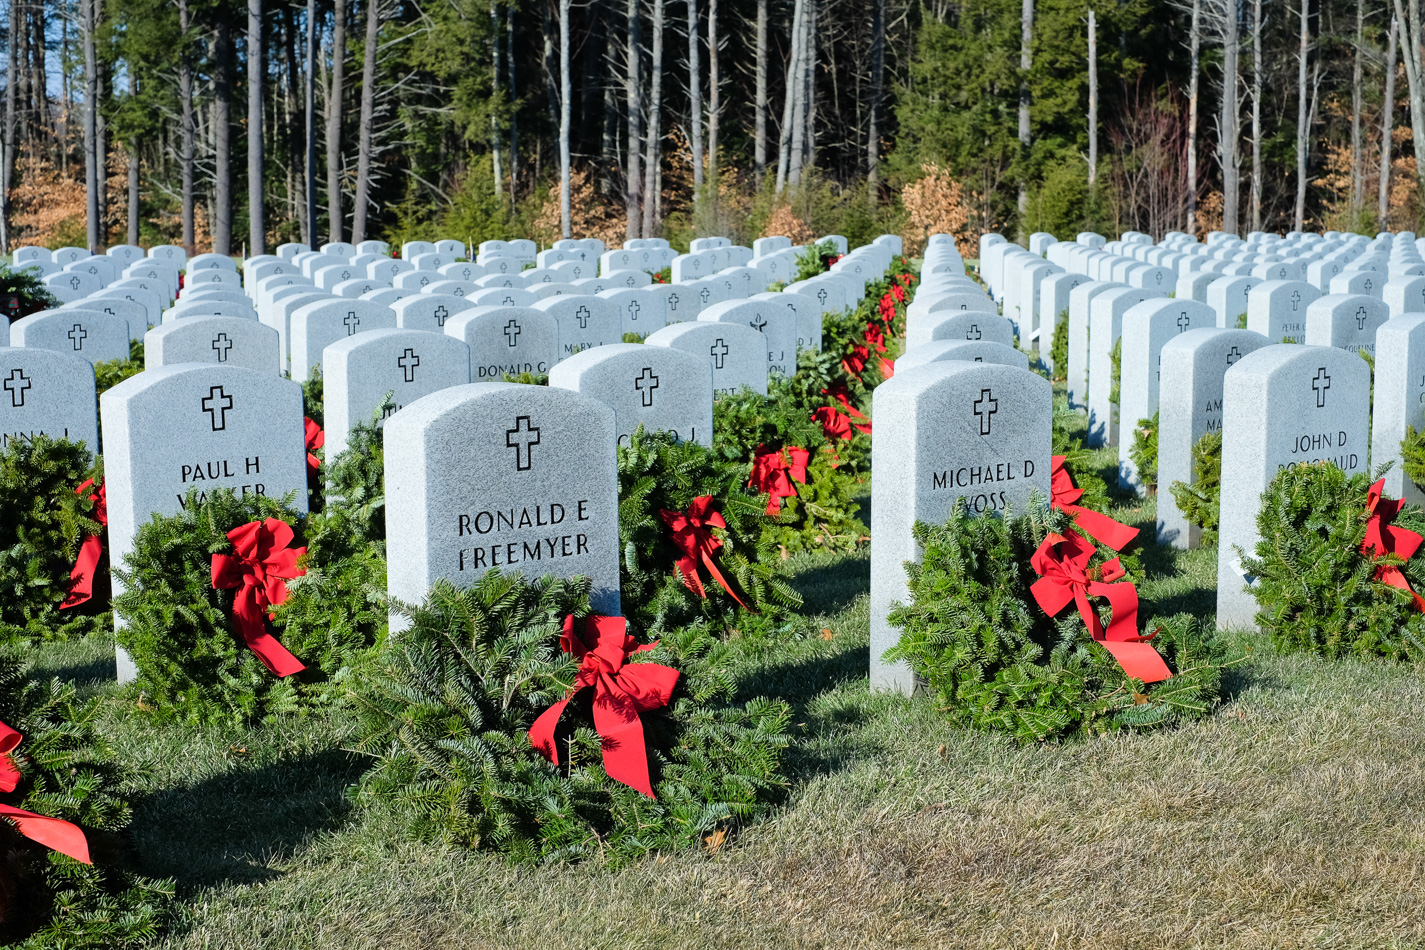 Holiday wreaths at the Massachusetts Veterans Cemetary, Winchendon, MA